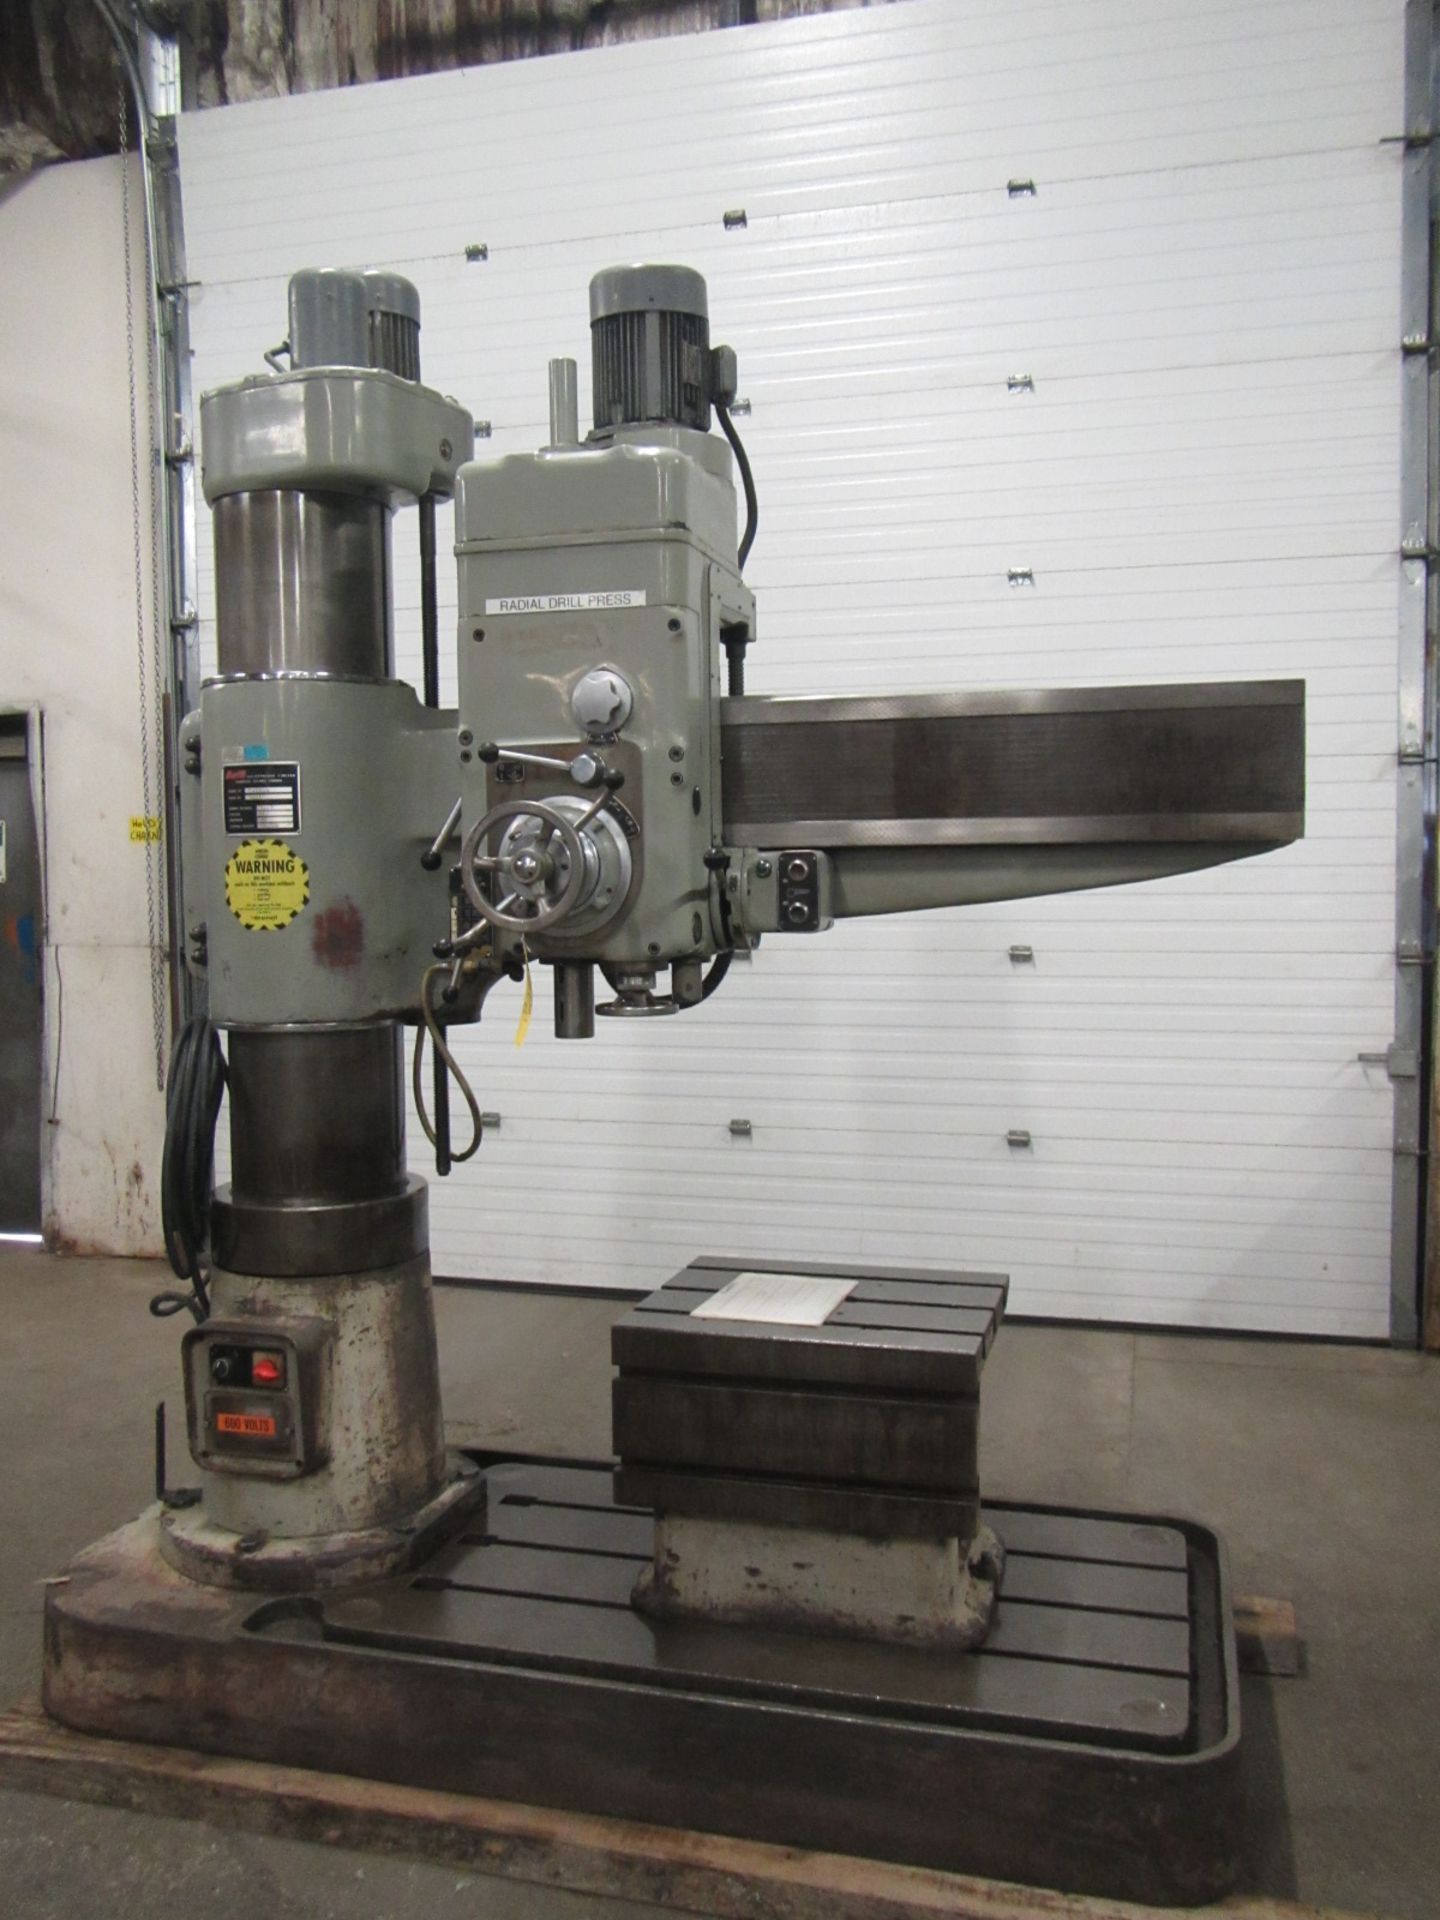 Havlik Radial Arm Drill 4 foot model Z3035B variable speed drill with T-Slot Box Table